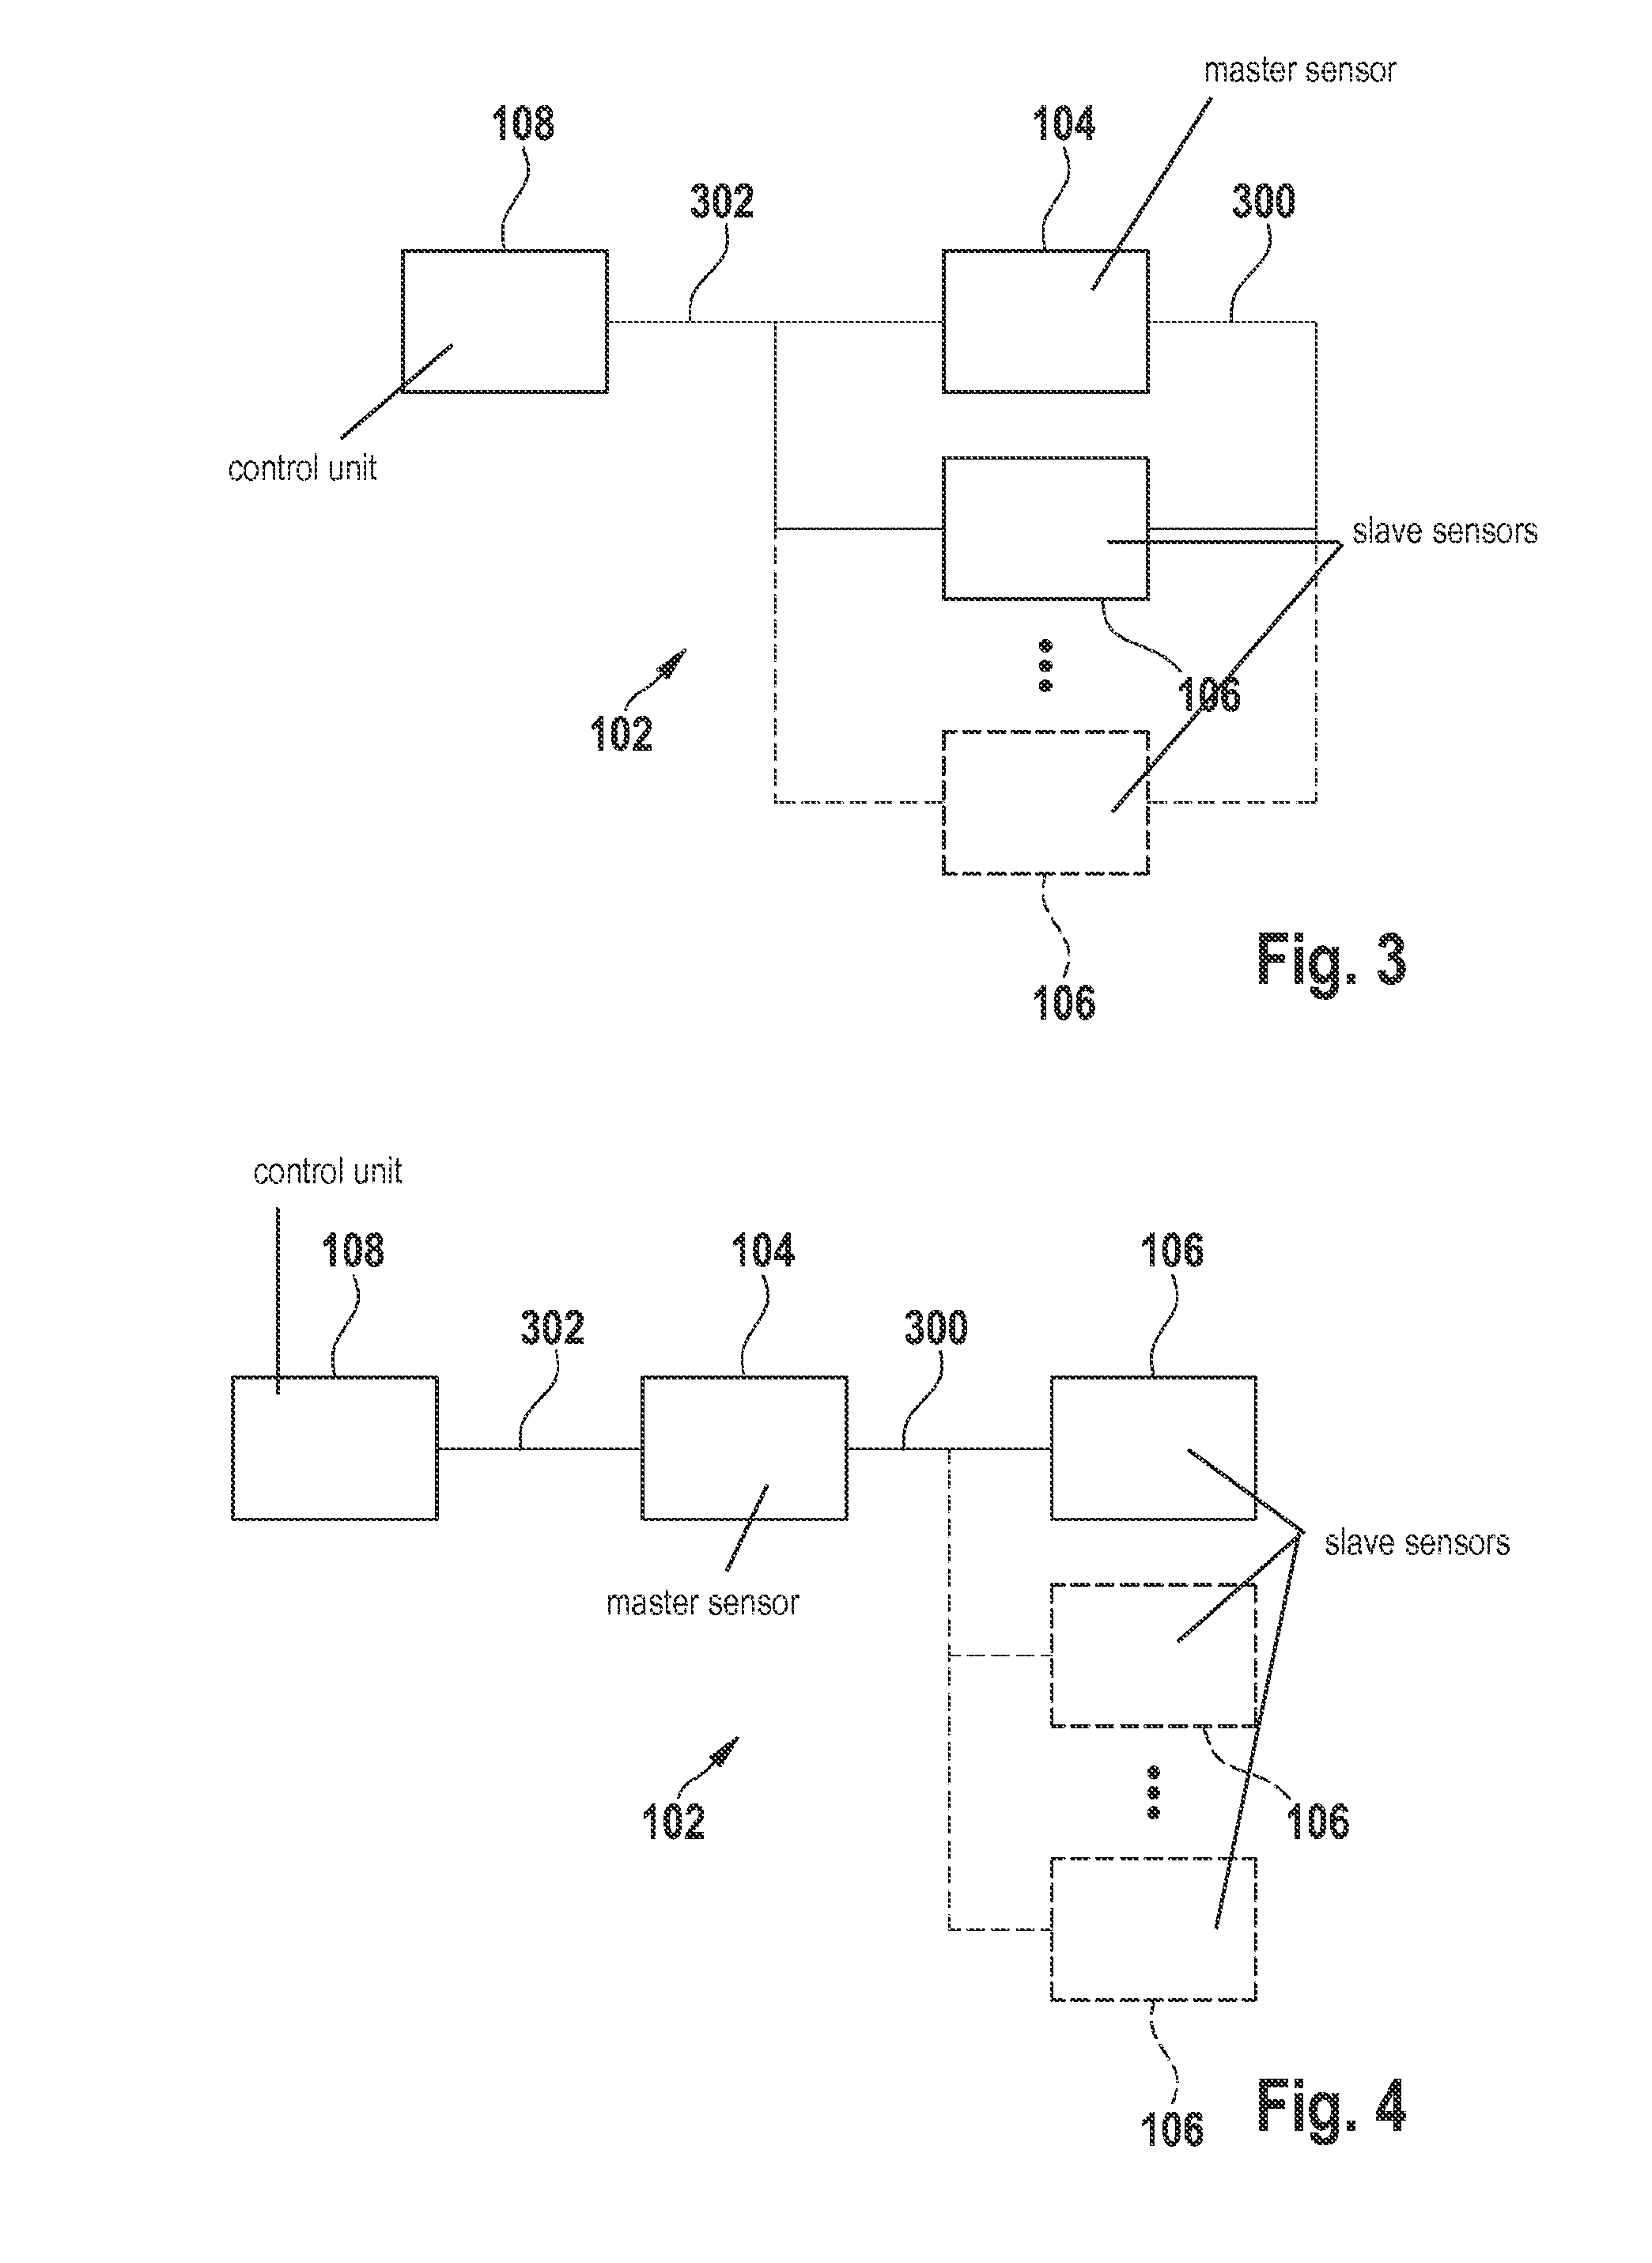 Method and device for coupling a first sensor to at least one second sensor